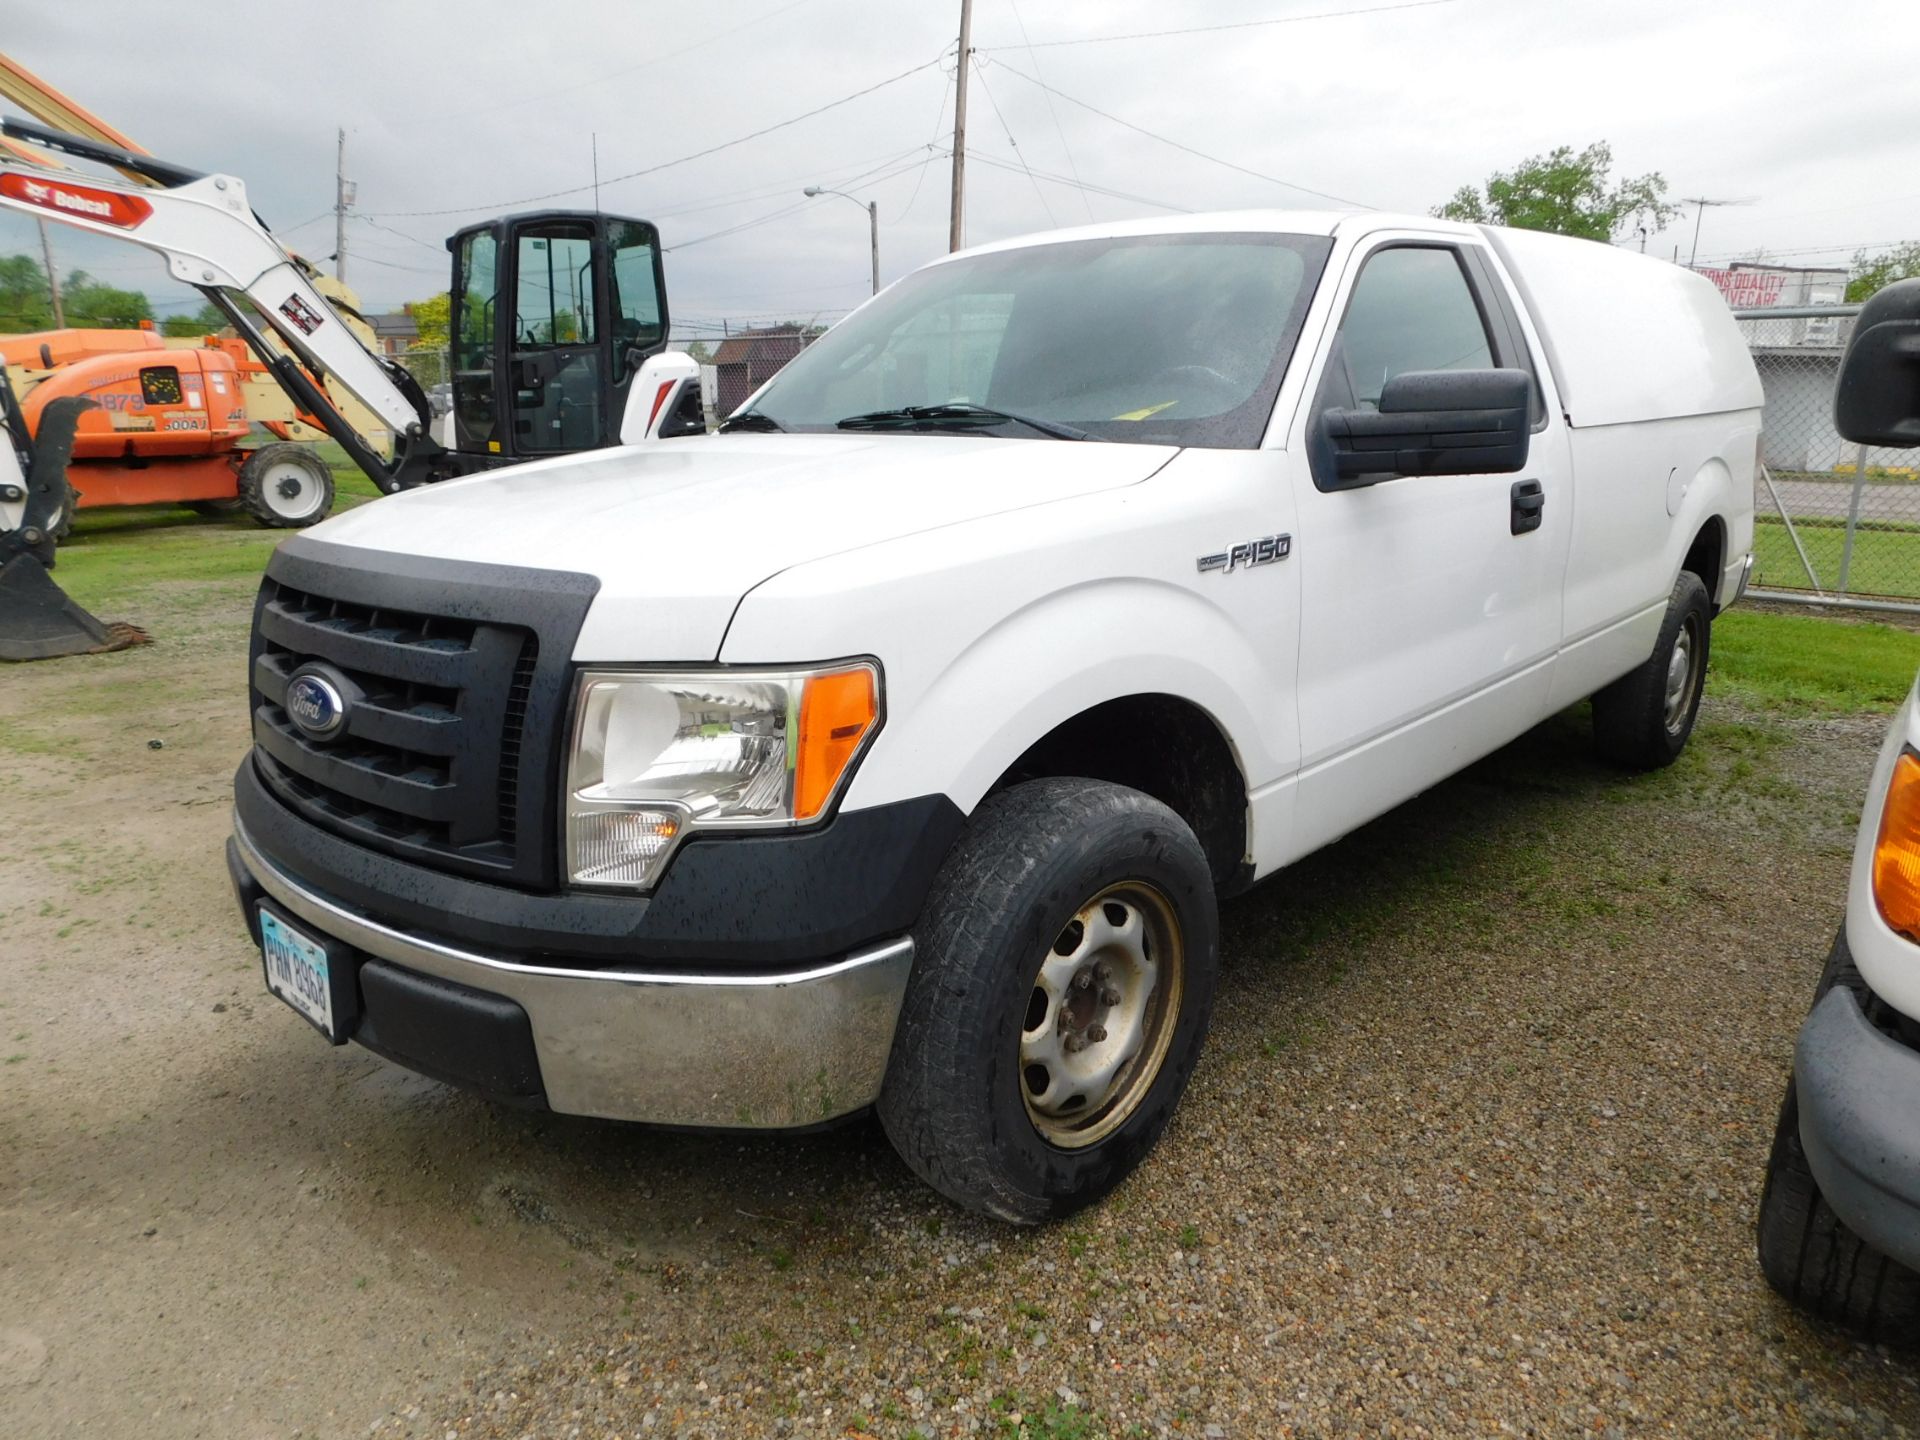 2011 Ford Pick up F-150XL vin 1FTMF1CM3CKD12942, Automatic Transmission, PW, Pl, 8'Bed w/Cap 146,289